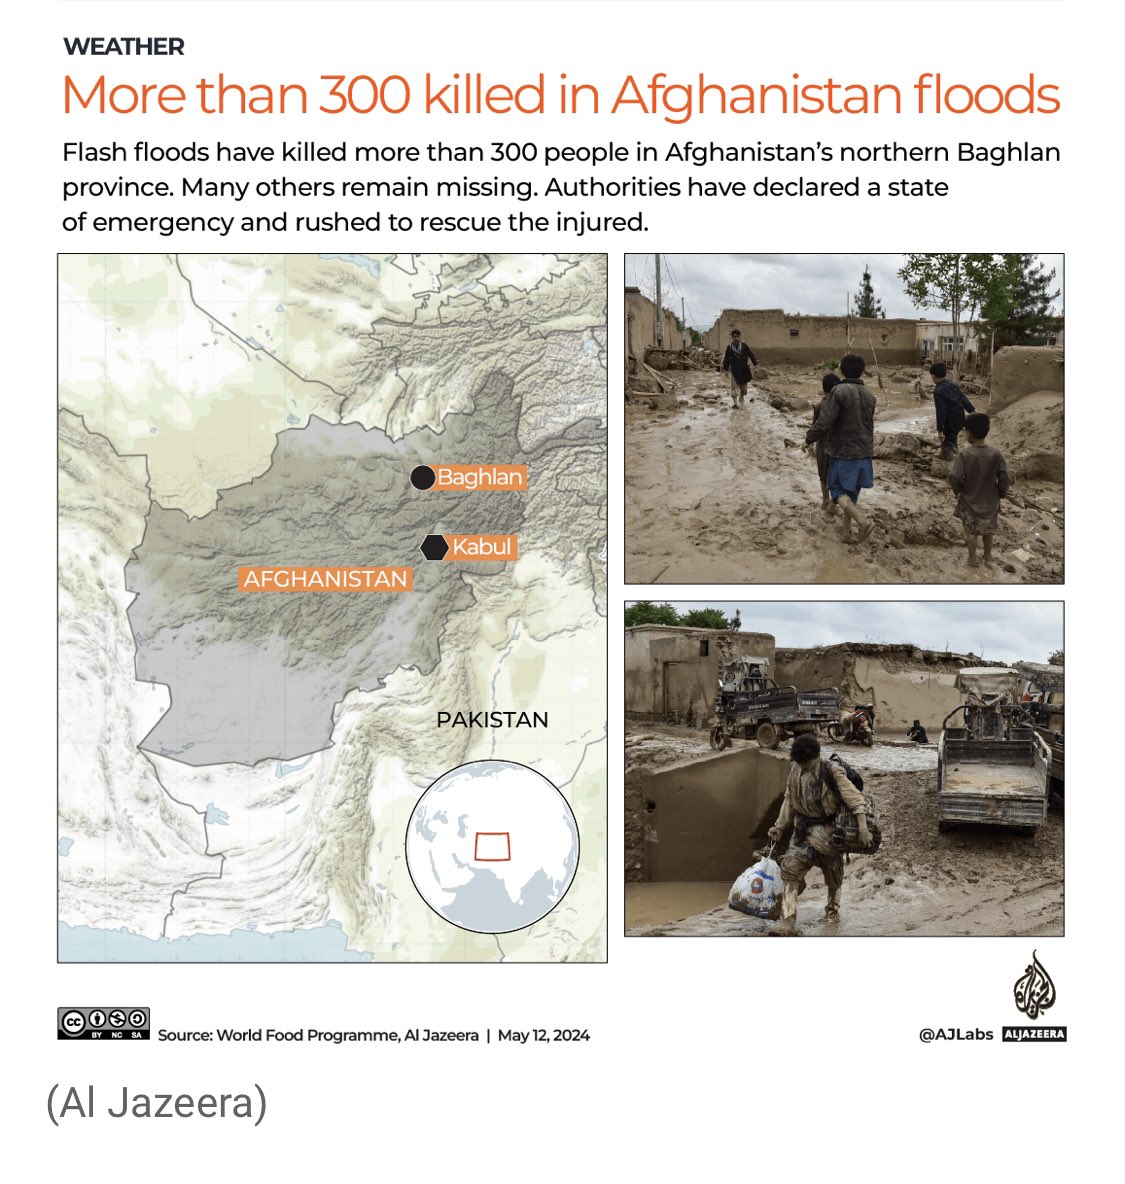 Devastating news, more than 300 killed in floods in #Afghanistan and more than 1600 people injured. 💔 An already suffering region, our thoughts and prayers with all 🙏